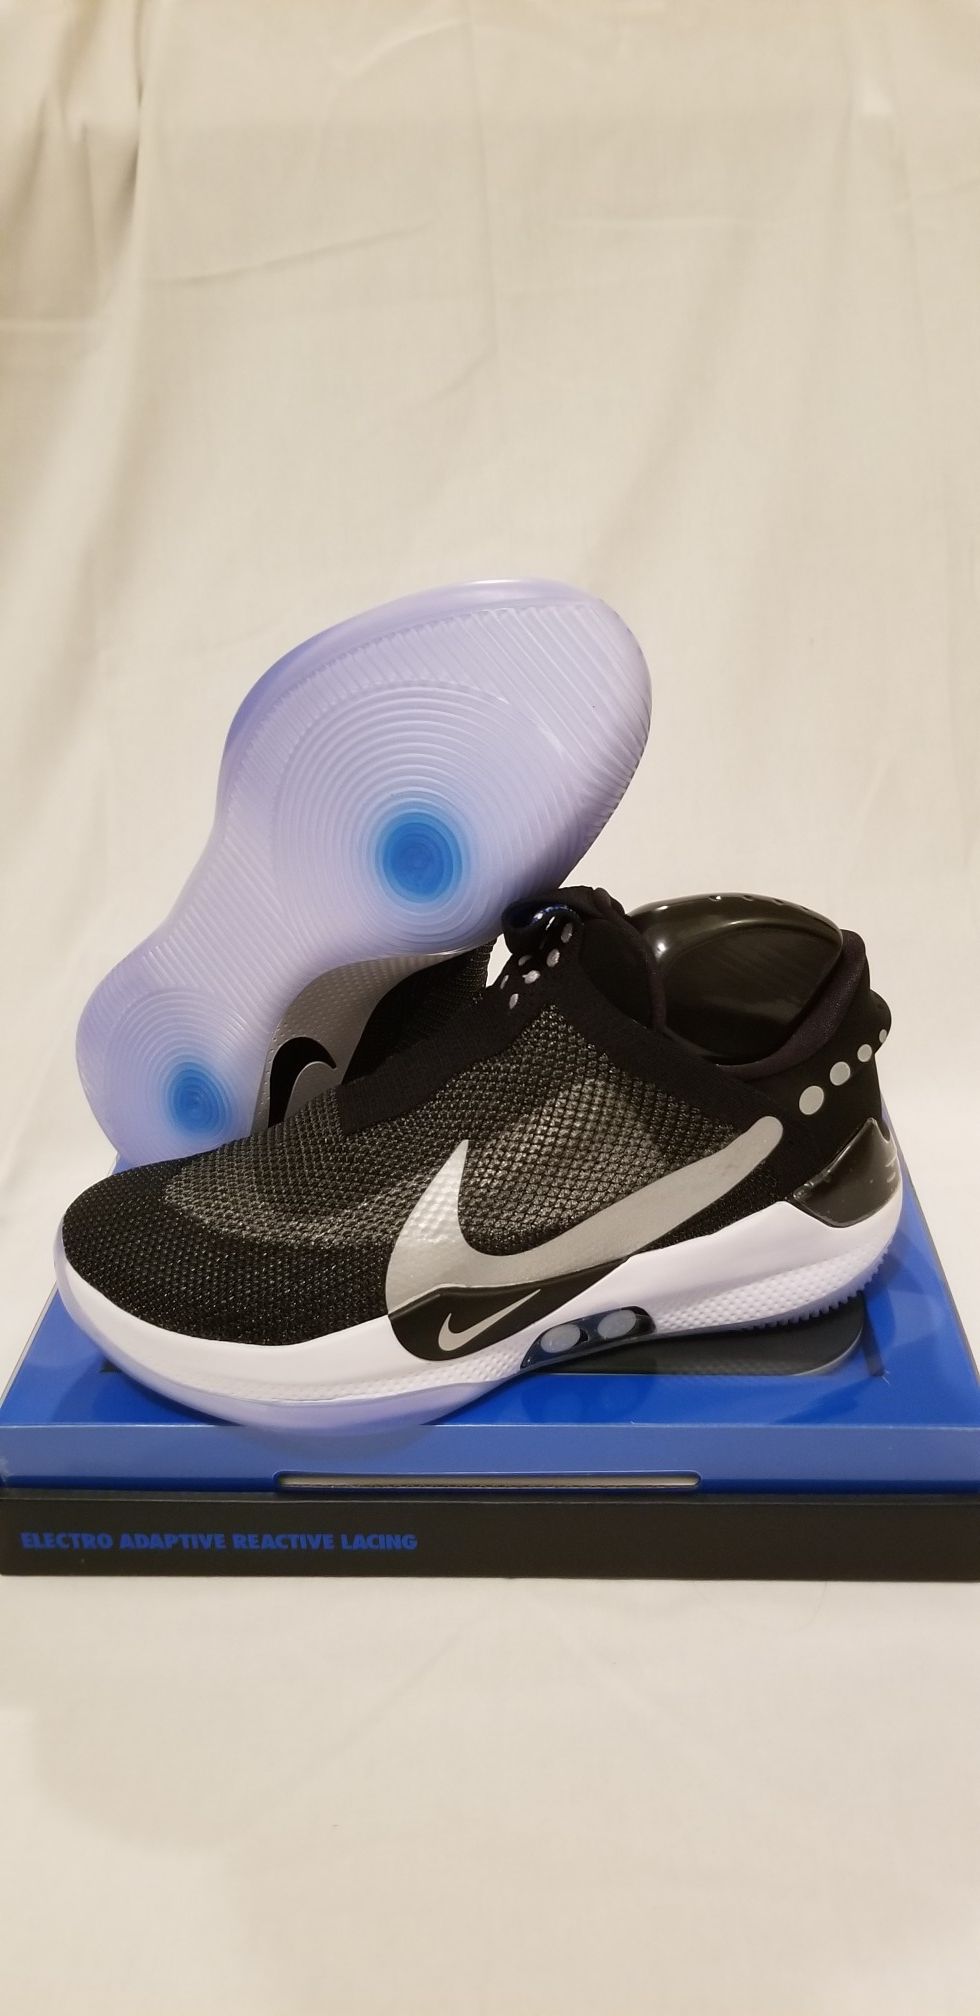 Nike Adapt BB sizes 9 and 9.5